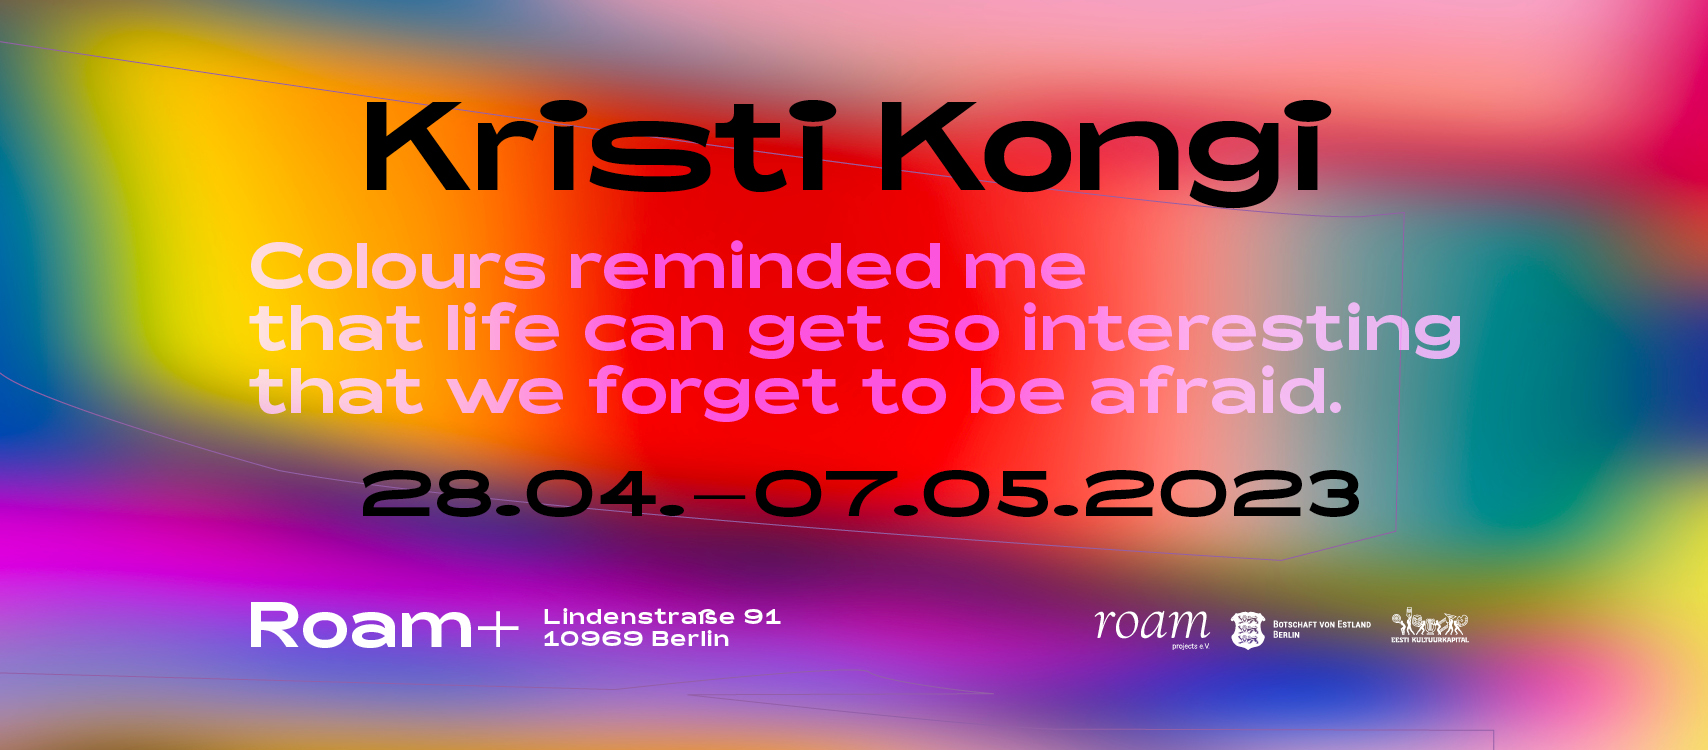 Kristi Kongi “Colours reminded me that life can get so interesting that we forget to be afraid.”